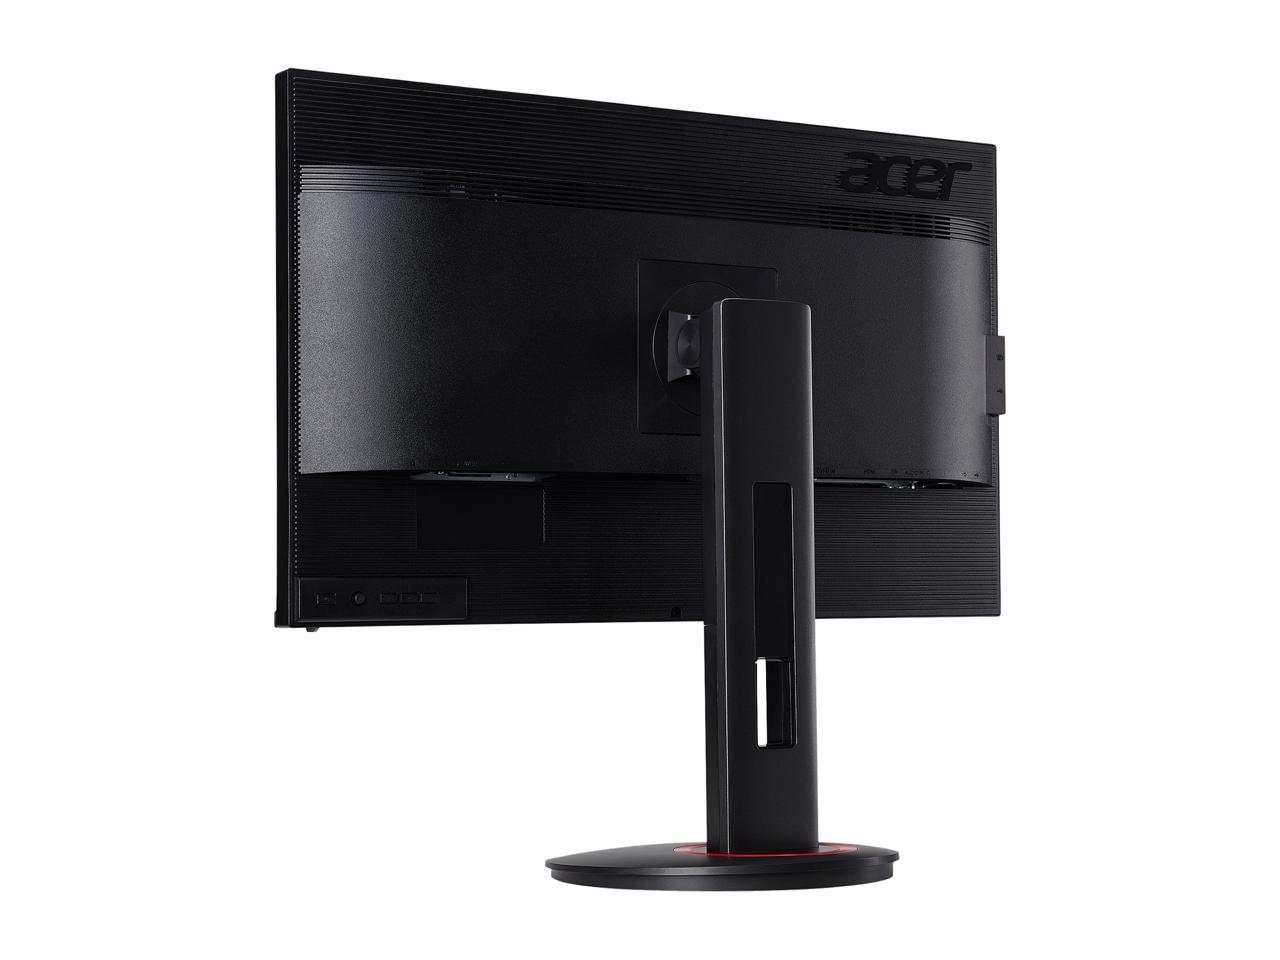 1ms 144Hz Refresh 1920 x 1080 Zero Frame TN G-SYNC Compatible Gaming Monitor Display Port 1.2 & 2 x HDMI 2.0 Ports Acer XF270H Bbmiiprx 27 Full HD 